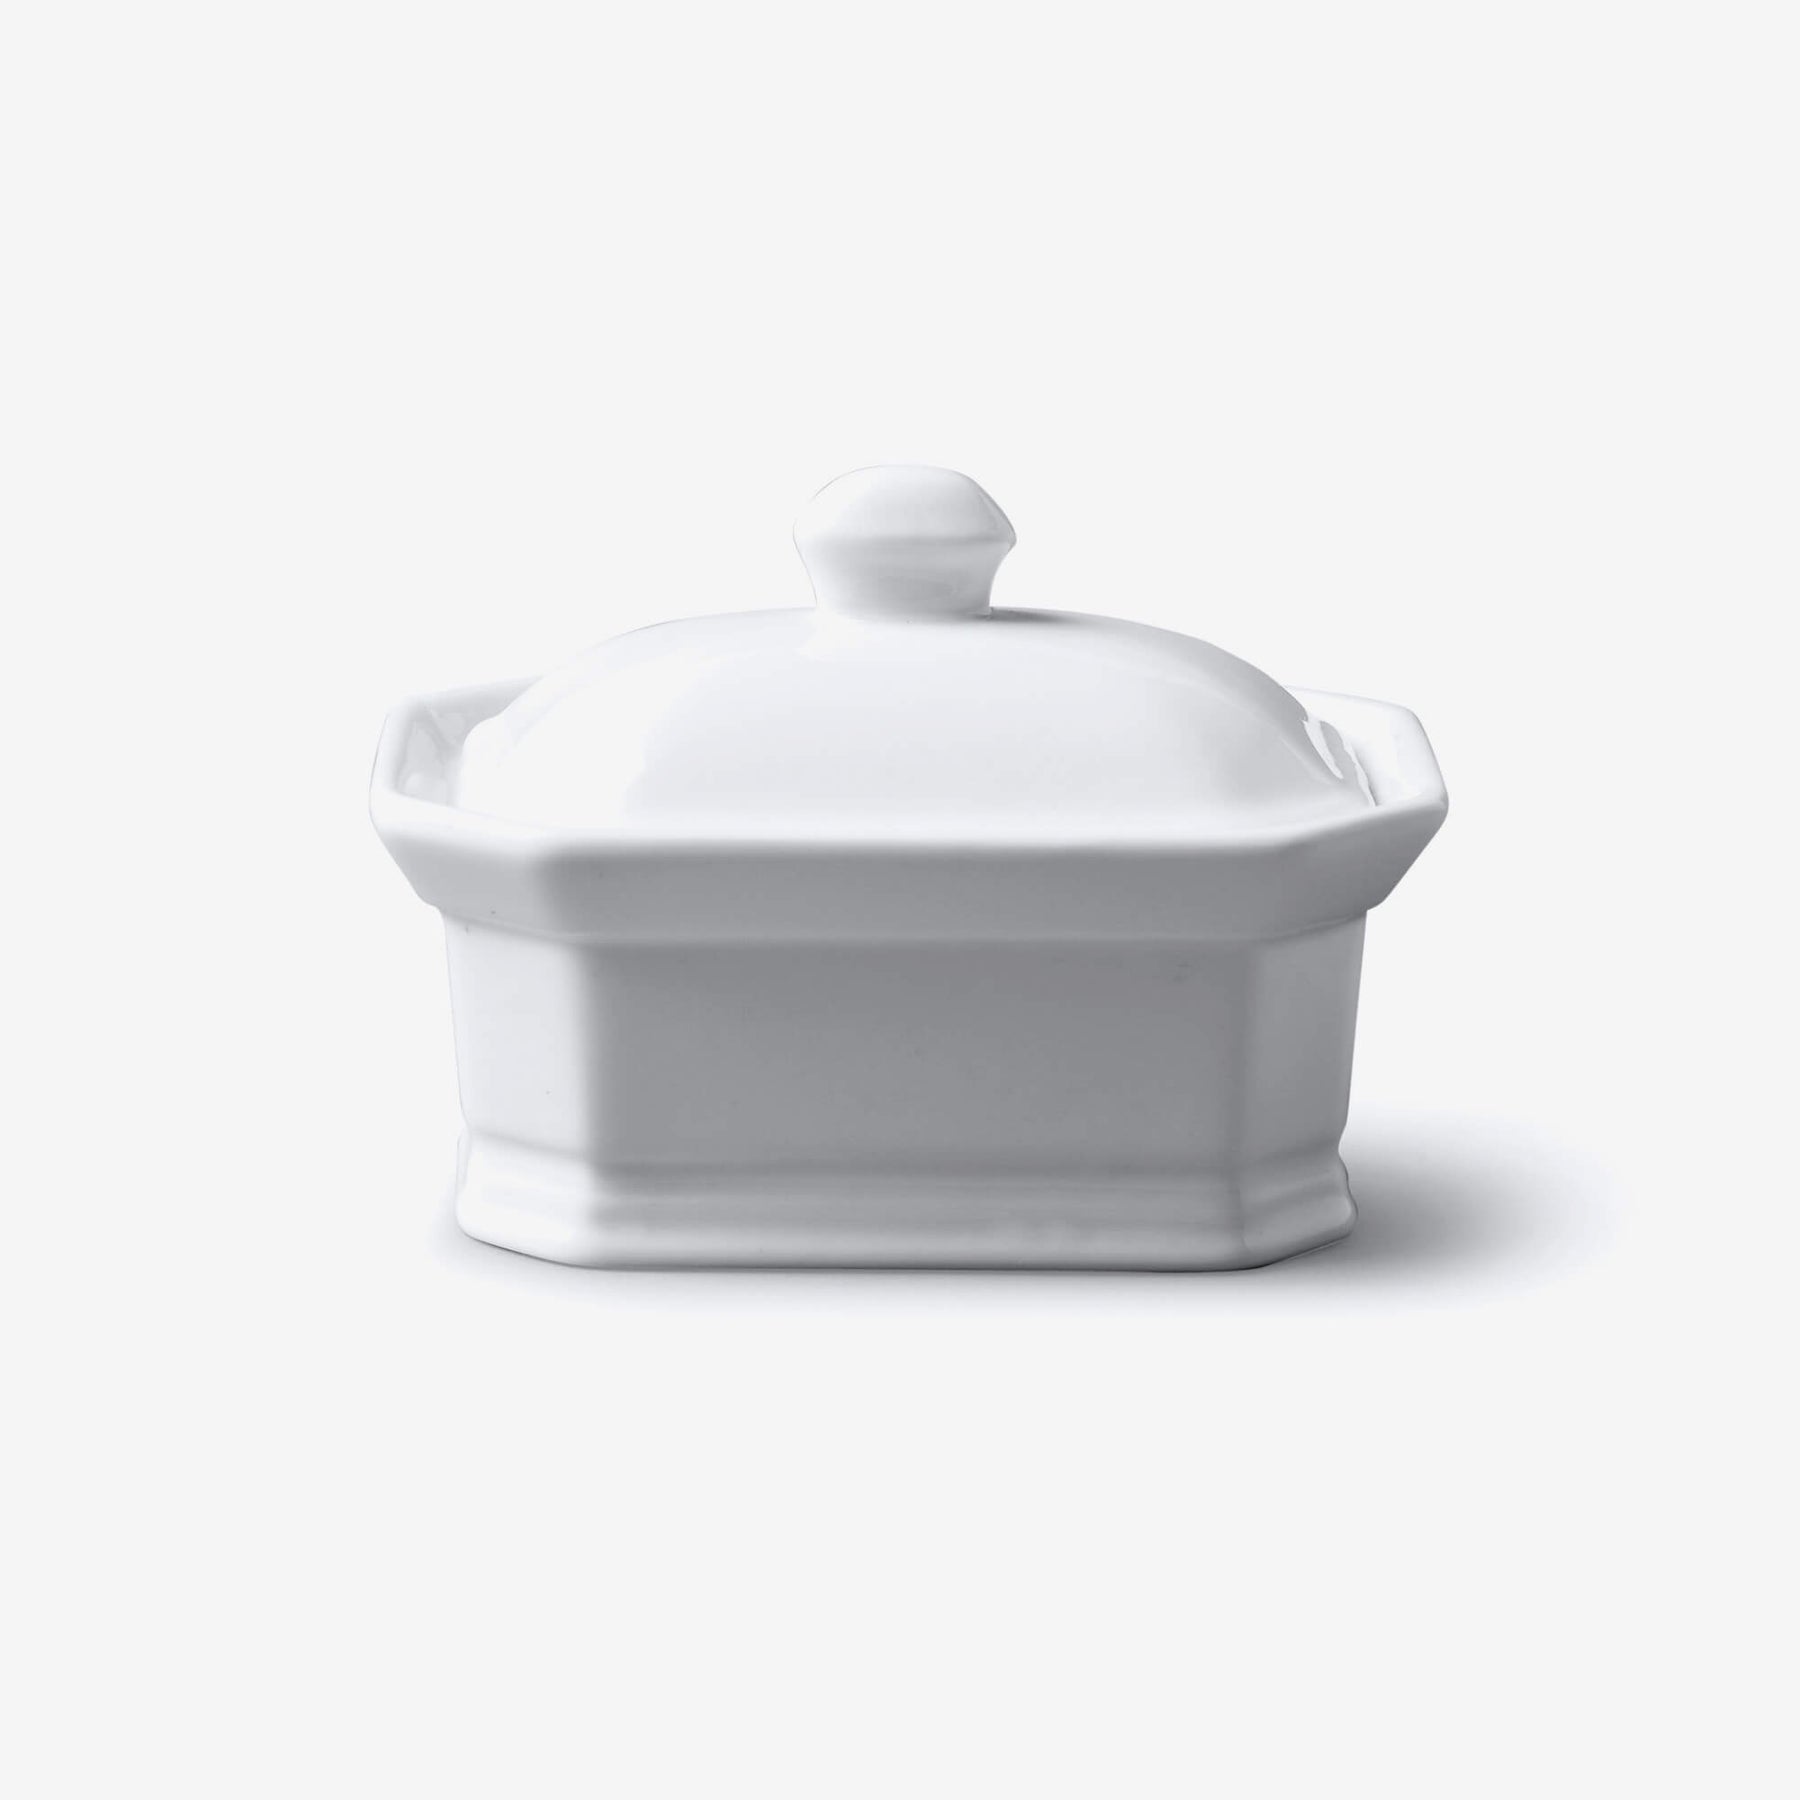 Porcelain Terrine/Butter Dish with Lid